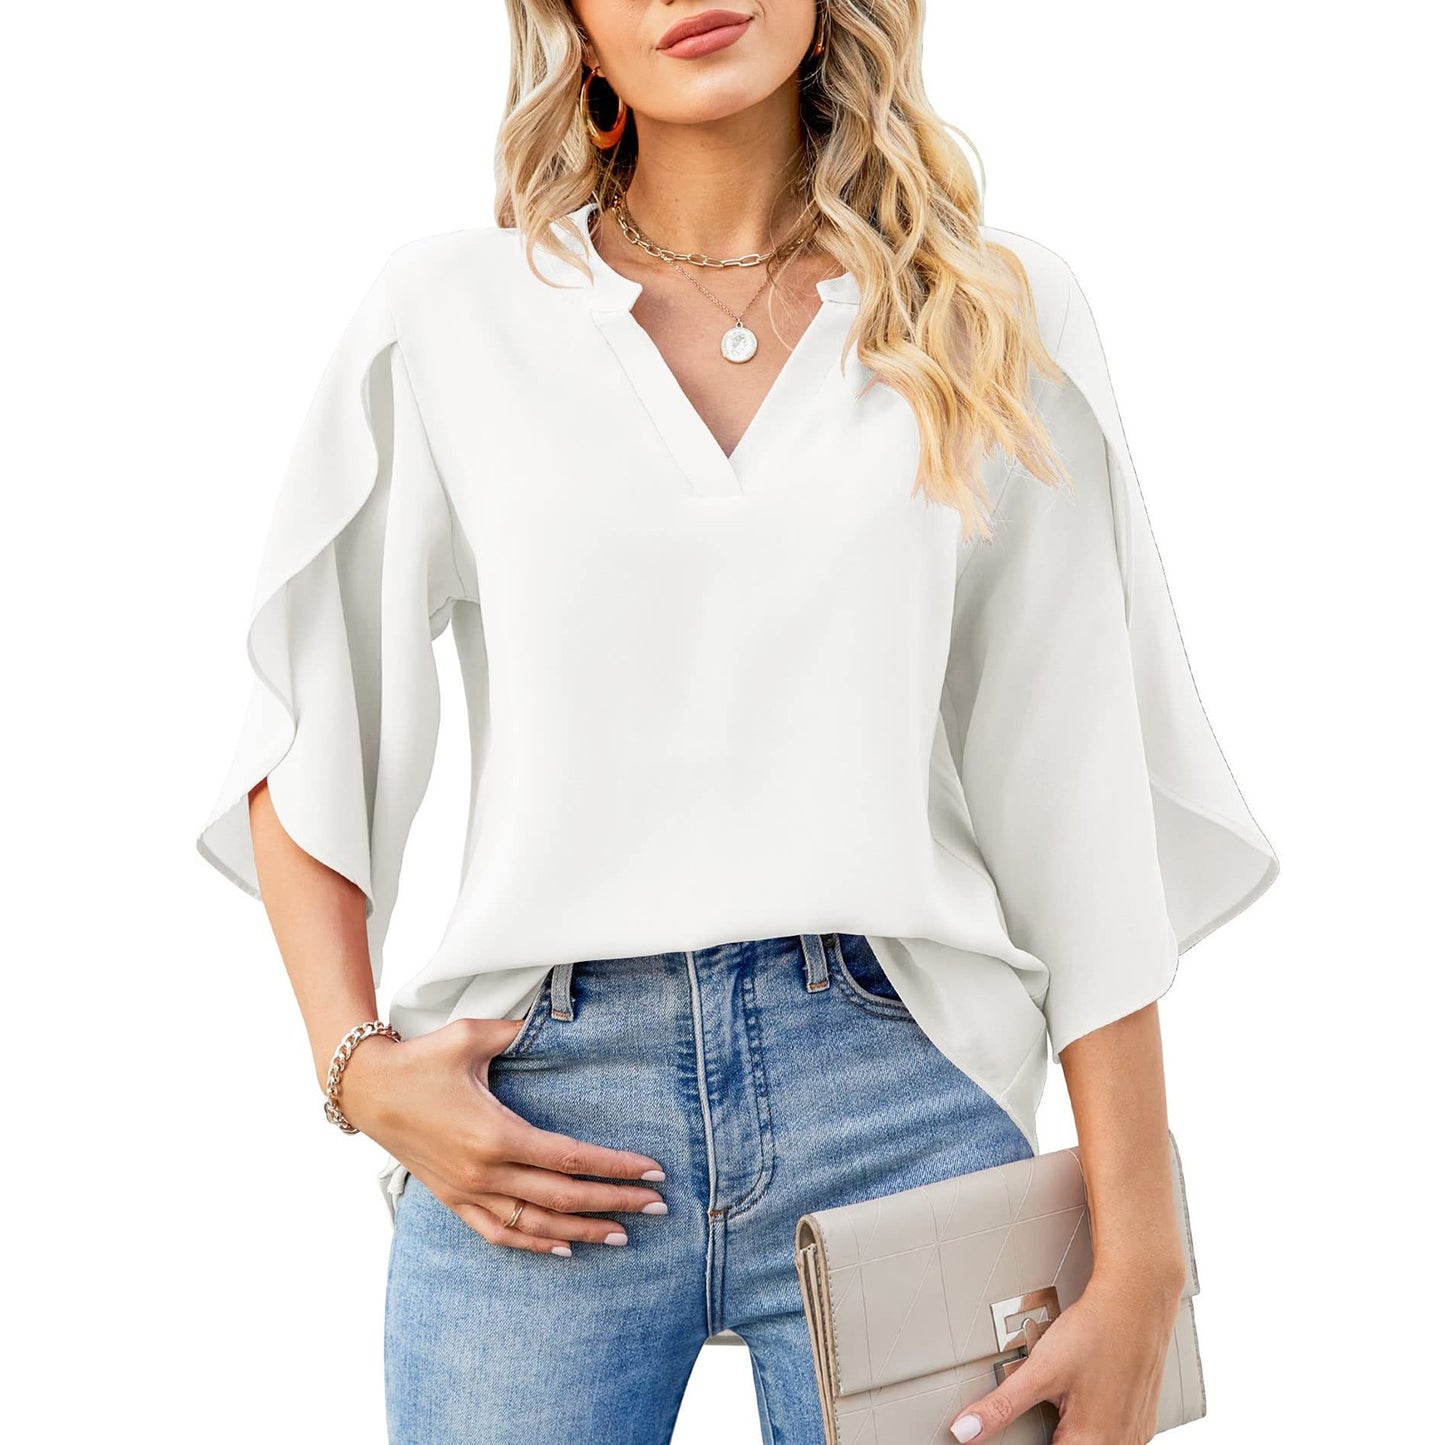 European And American Style Women Petal Sleeve Top Loose V-neck